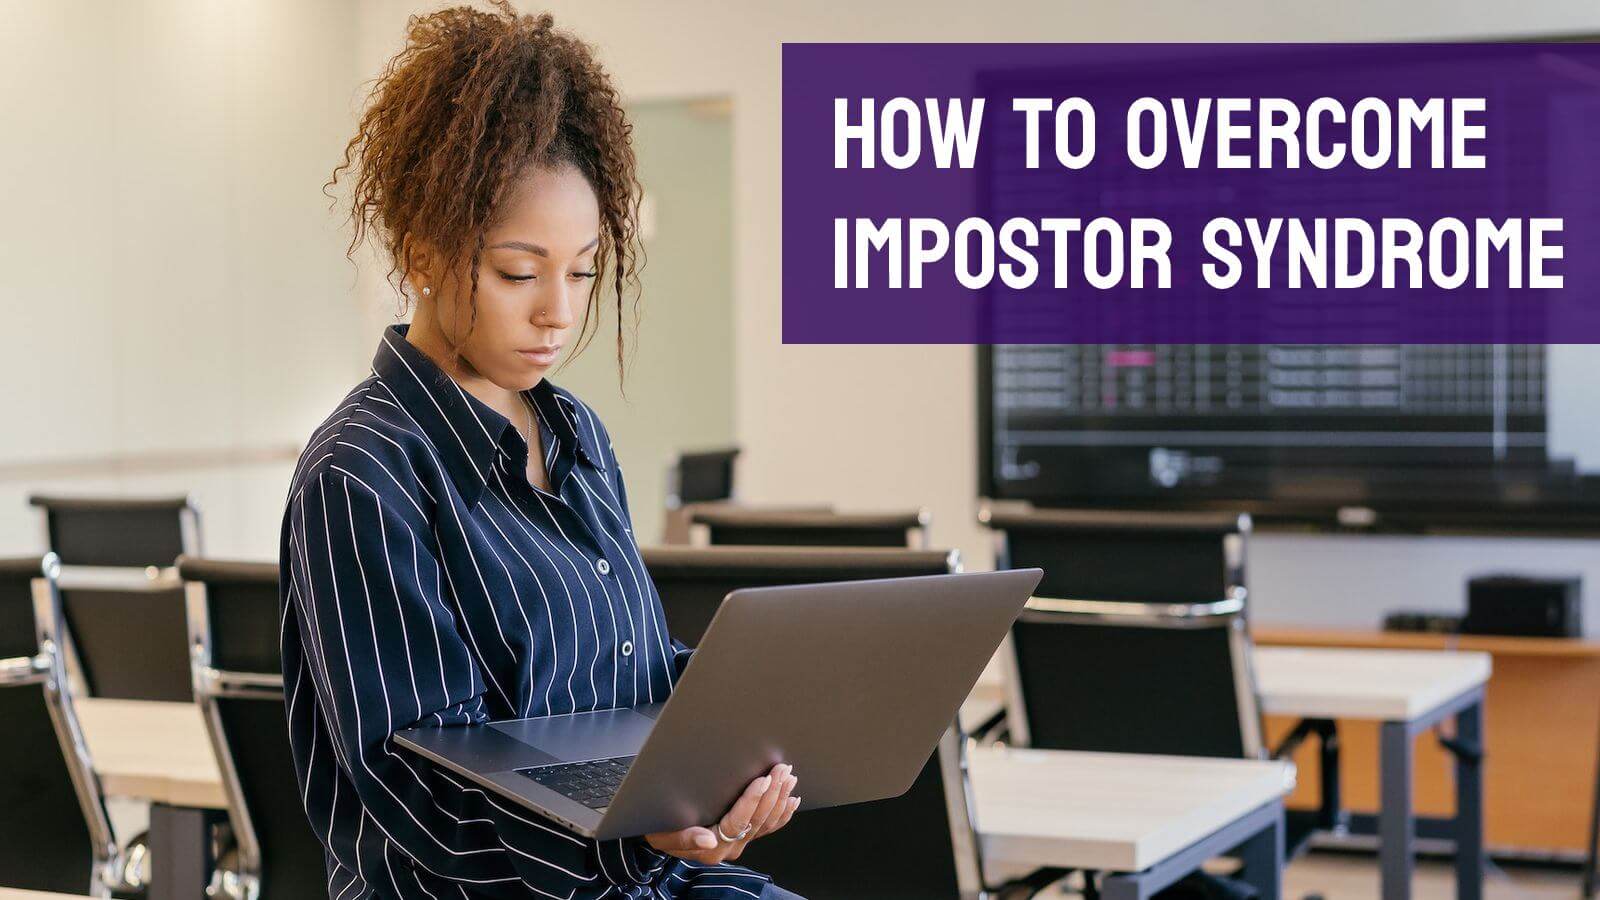 Impostor syndrome is an impediment to success. How do you deal with it?